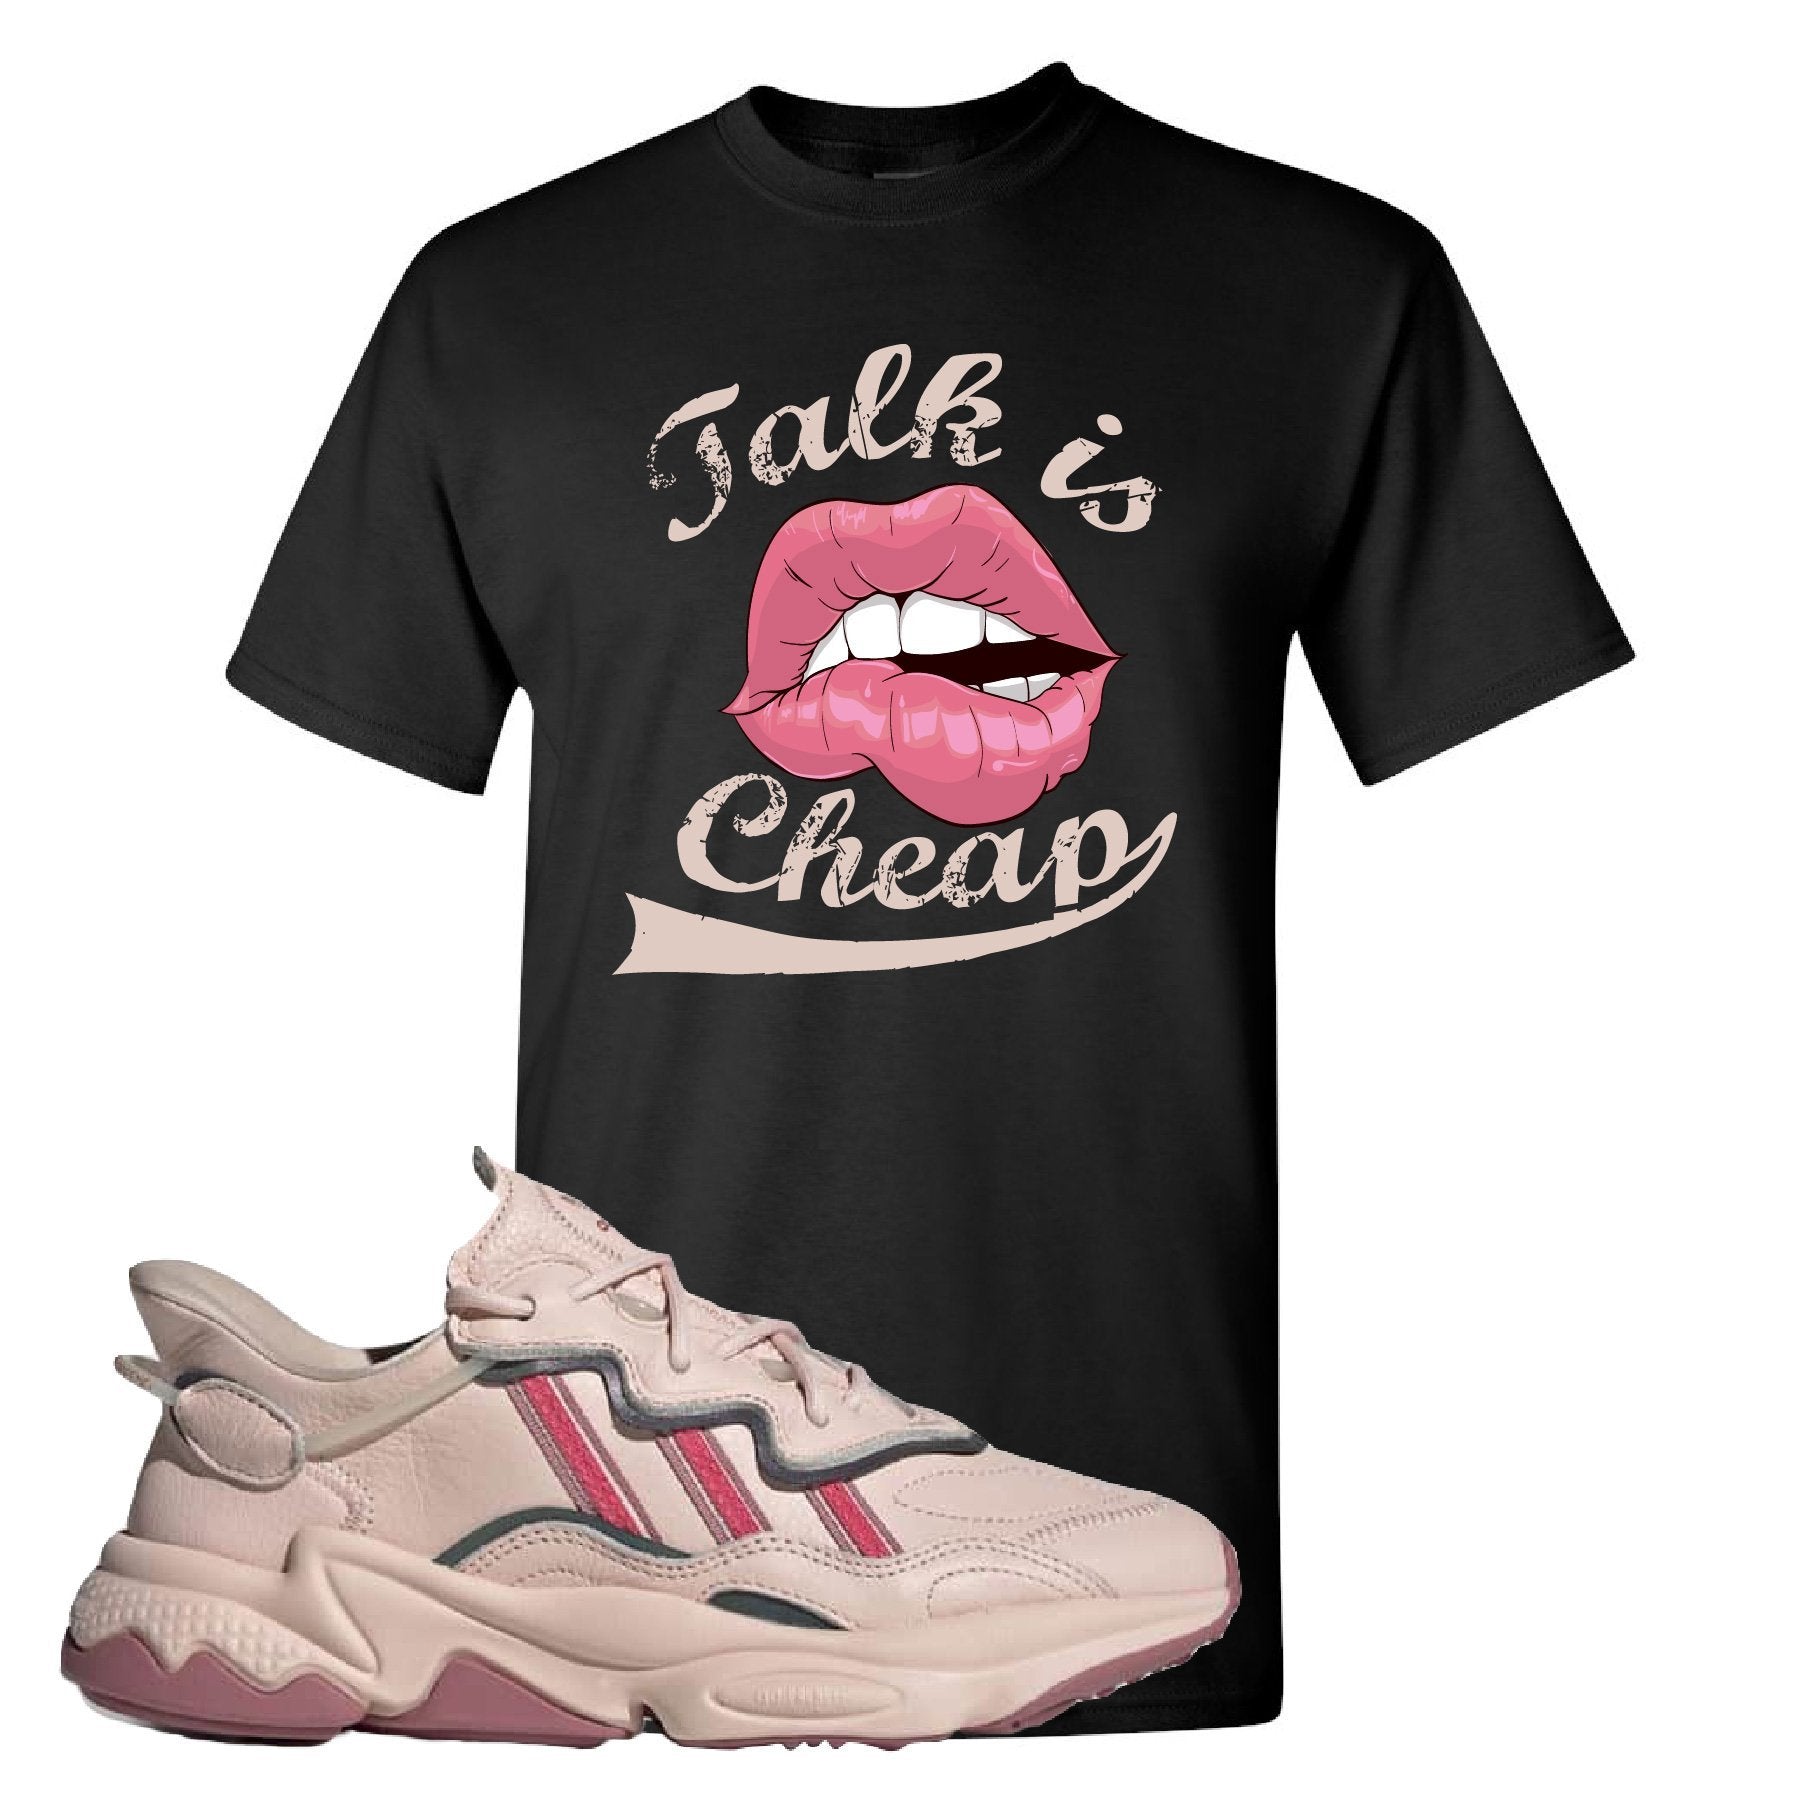 Adidas WMNS Ozweego Icy Pink Talk is Cheap Black Sneaker Hook Up Tee Shirt